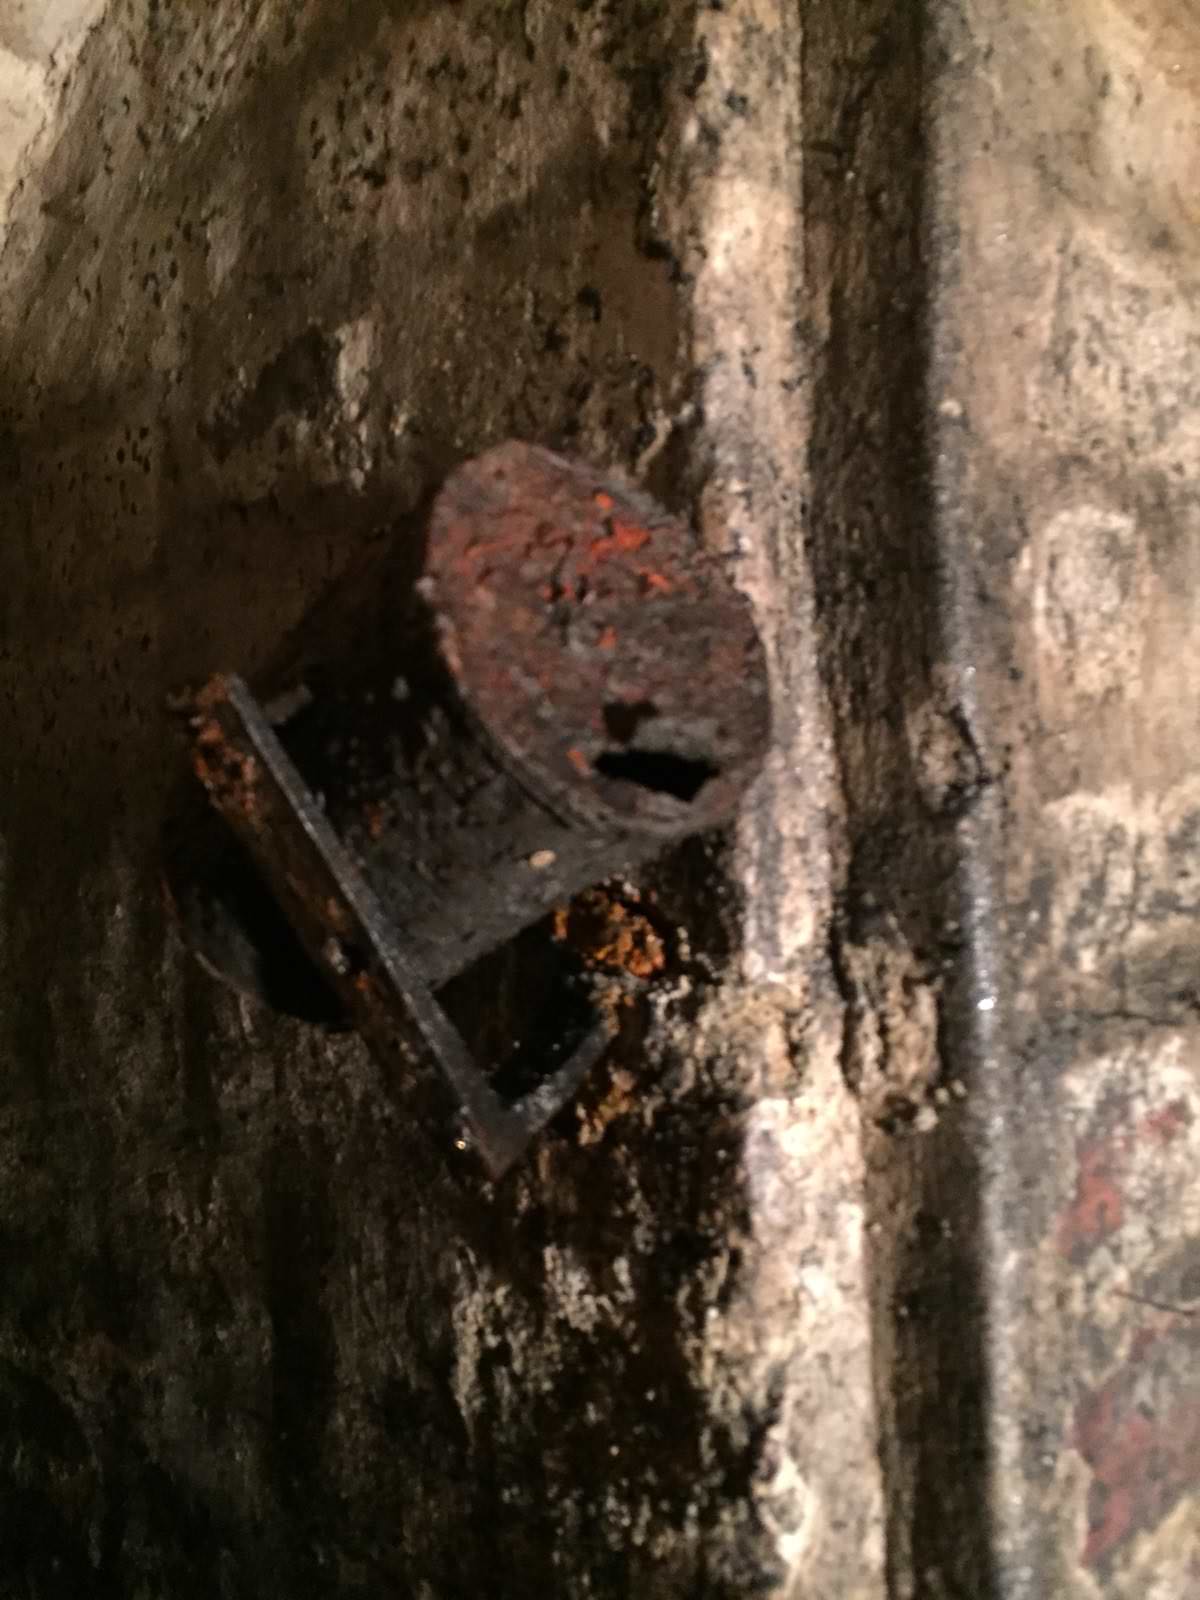 "The only object in the coal chute room. A can. Totally rusted everywhere so nothing to distinguish what it could have been. Cans were trademarked back in 1811. At around 1840-1850 they were commercialized which could mean a worker or someone left the can when they sealed up the wall during the time they built the manor in 1851."